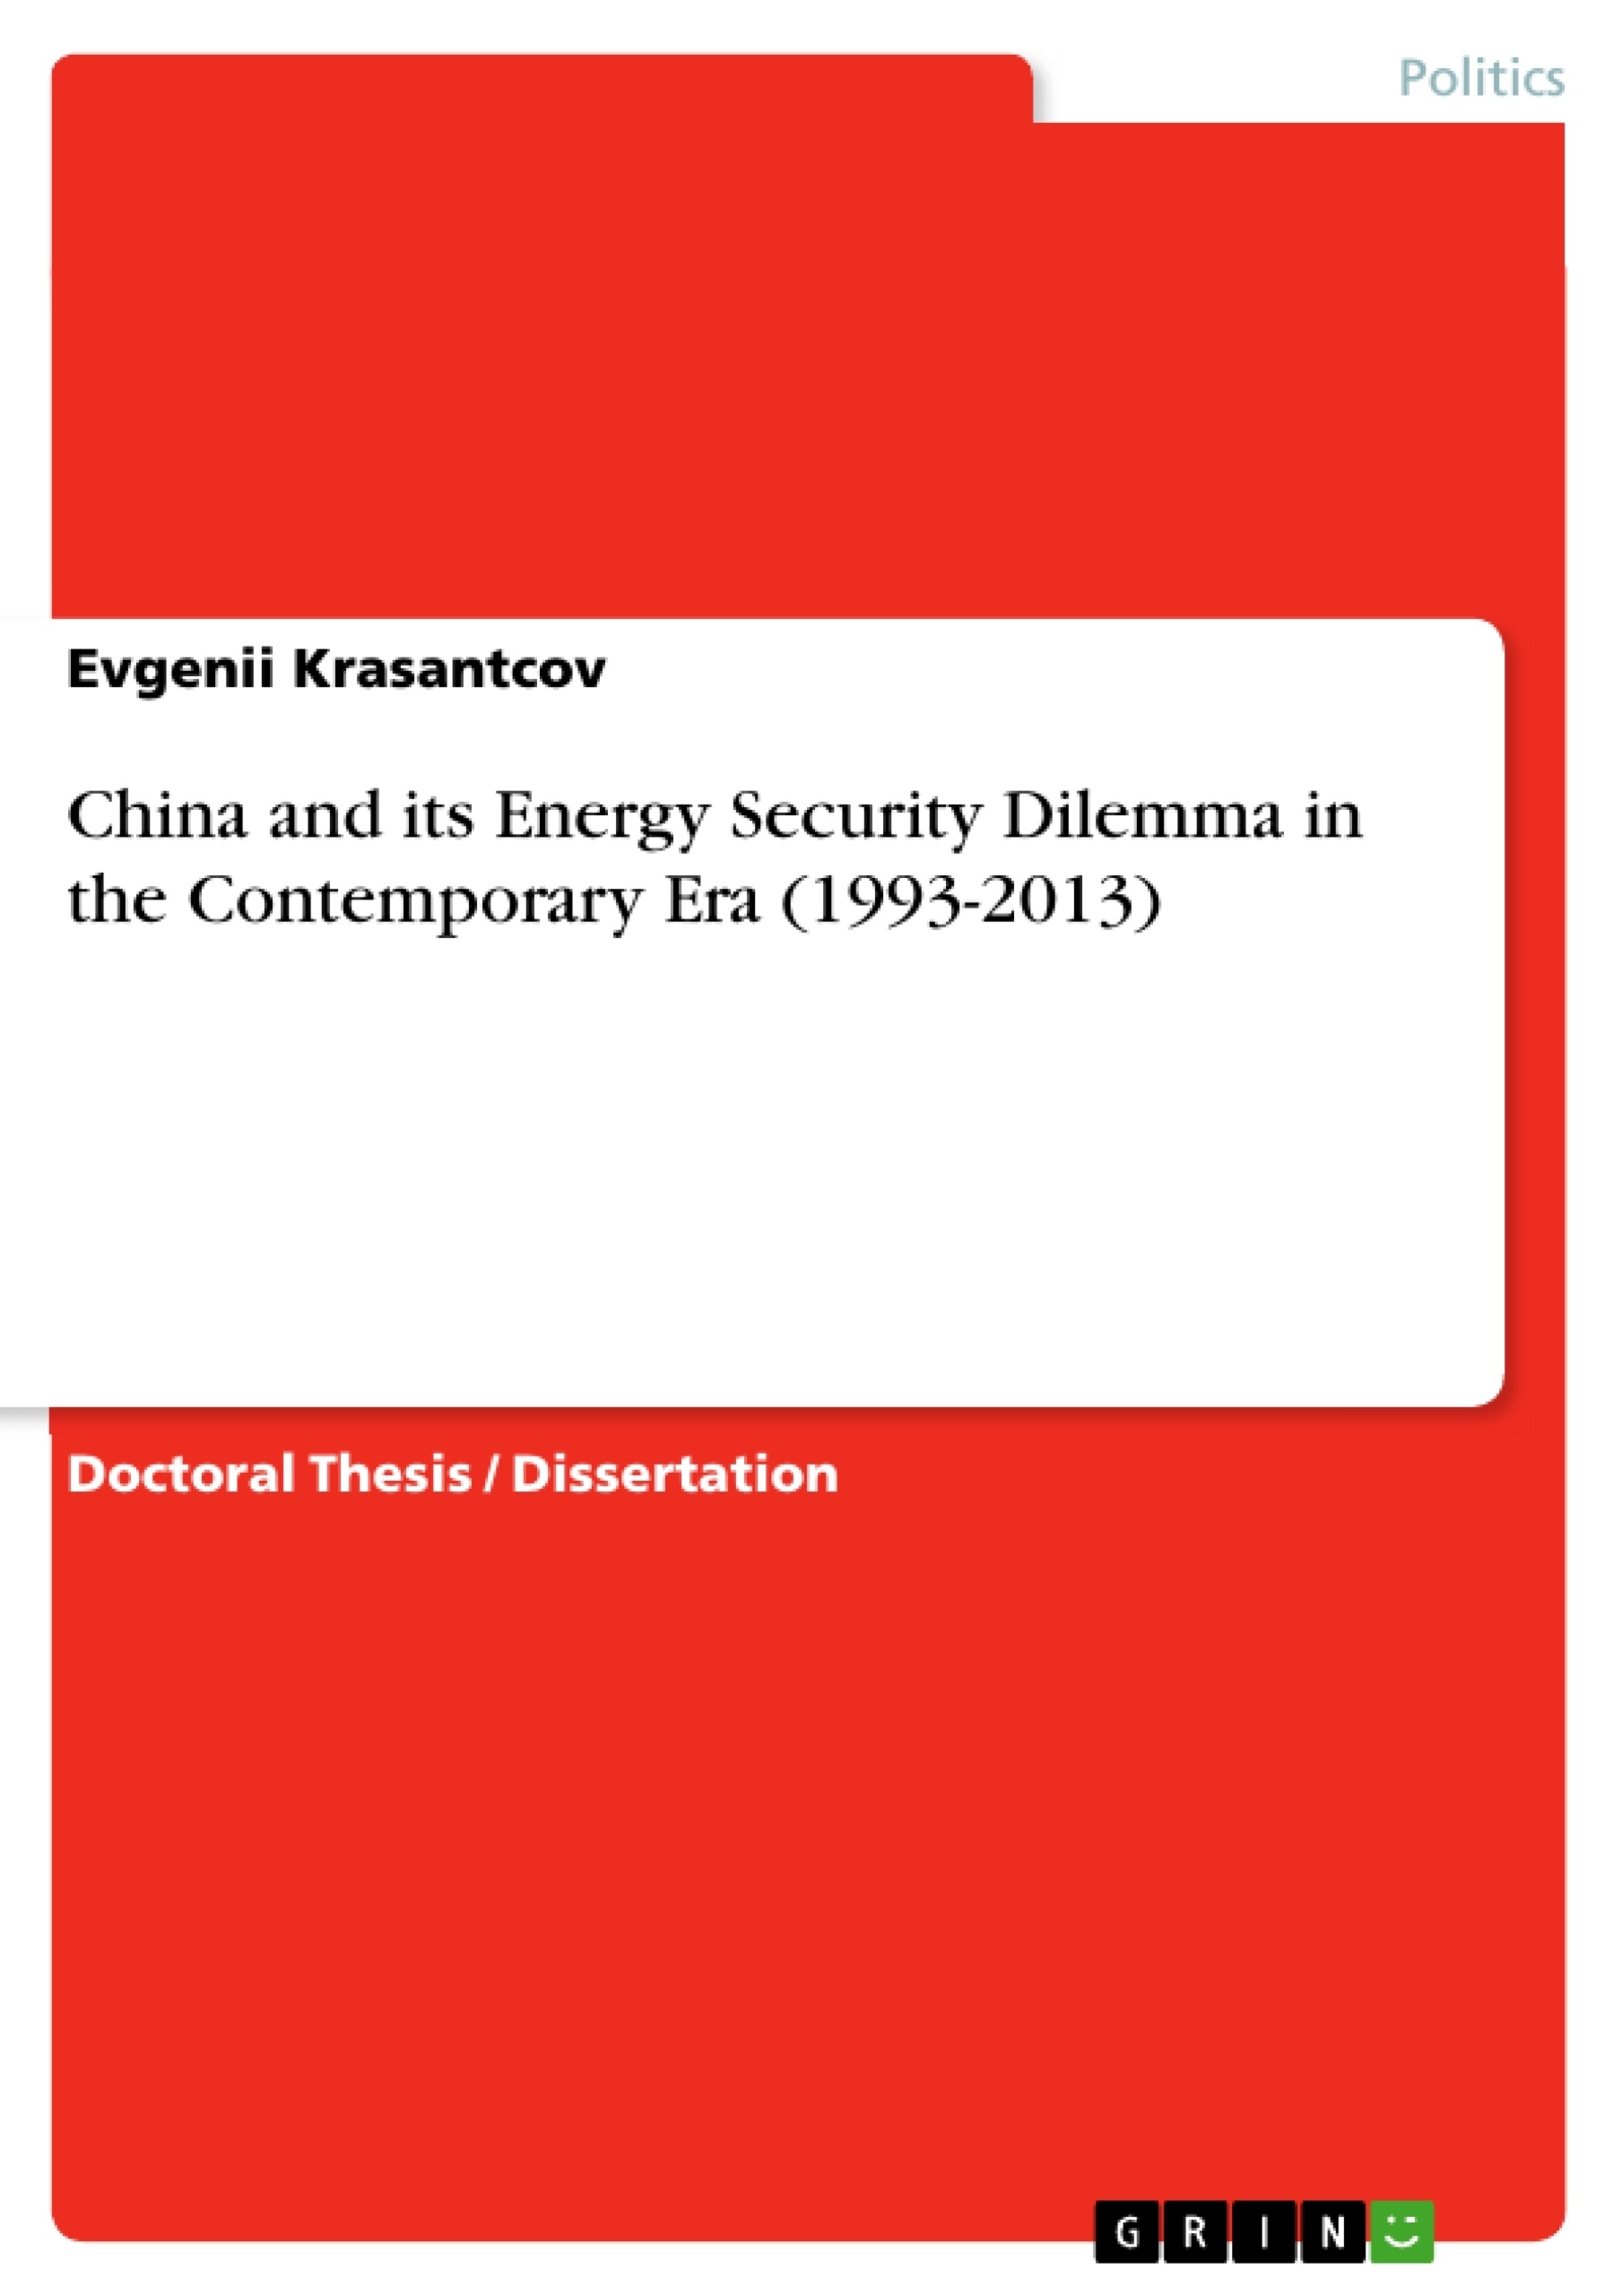 Titre: China and its Energy Security Dilemma in the Contemporary Era (1993-2013)